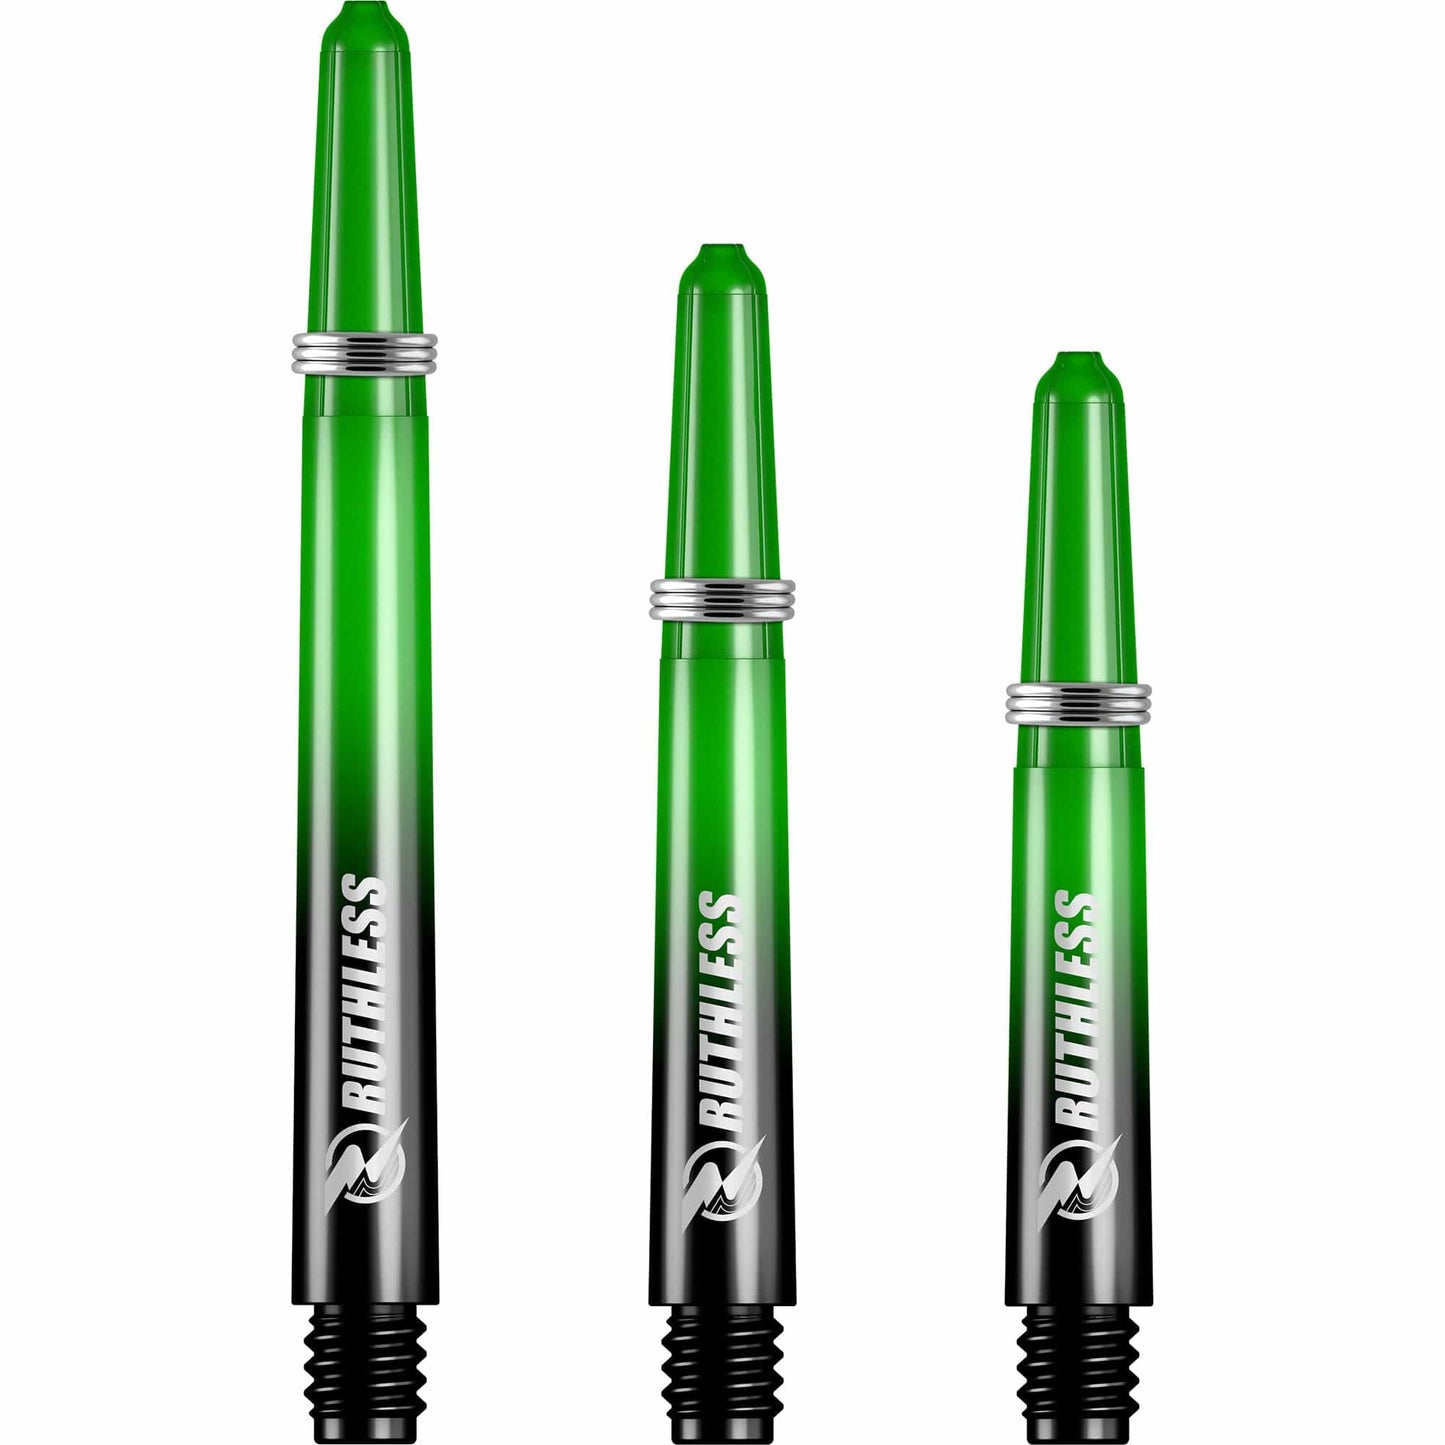 Ruthless Deflectagrip Plus Dart Shafts - Polycarbonate Stems with Springs - Green